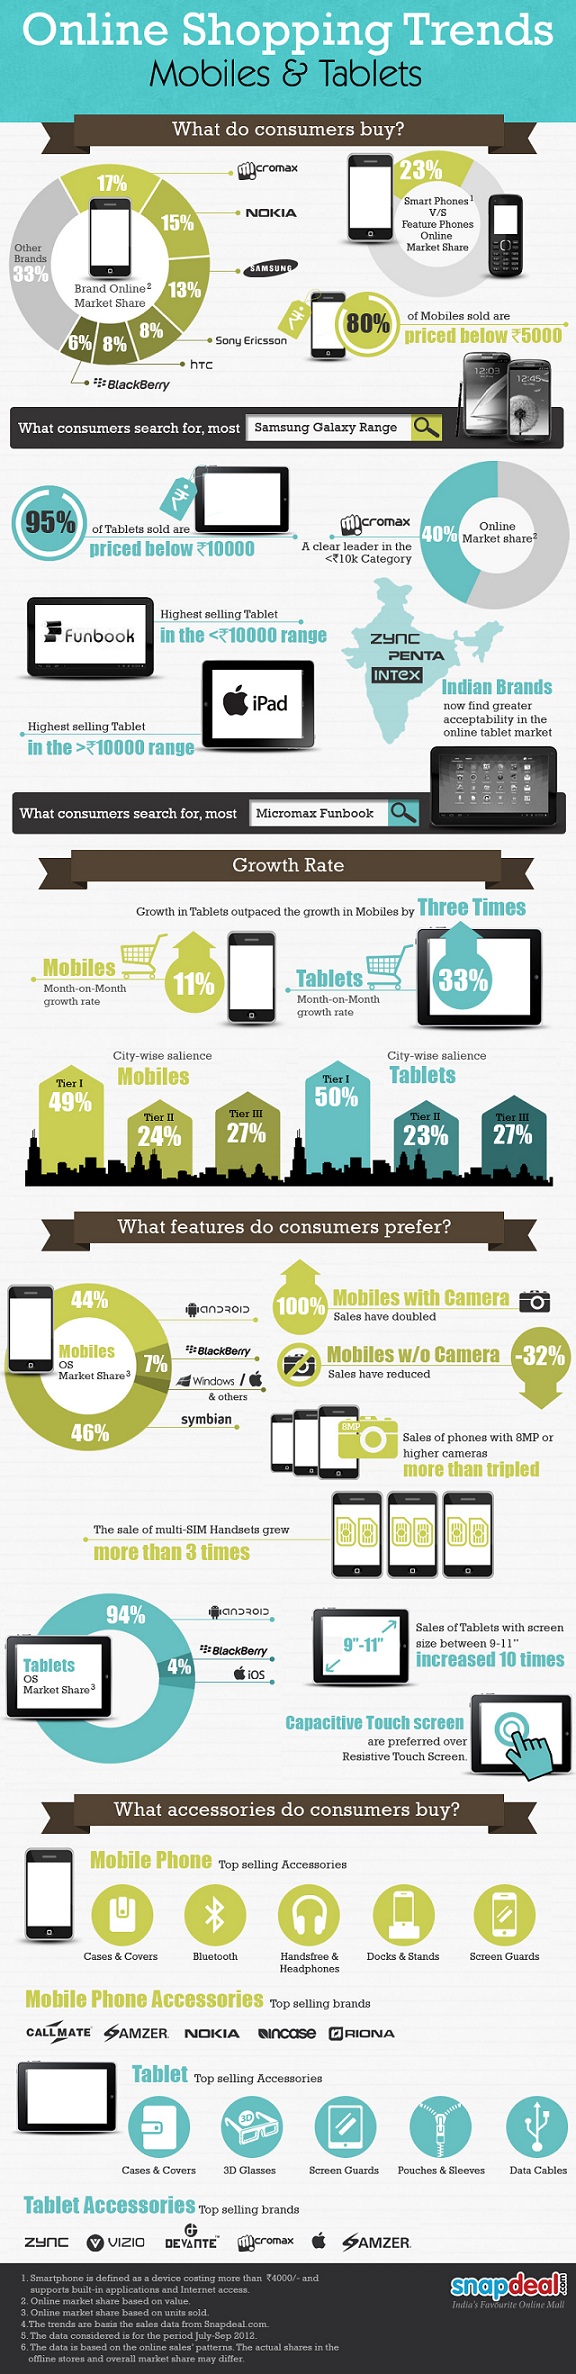 Tablet and Mobile Sale Trends